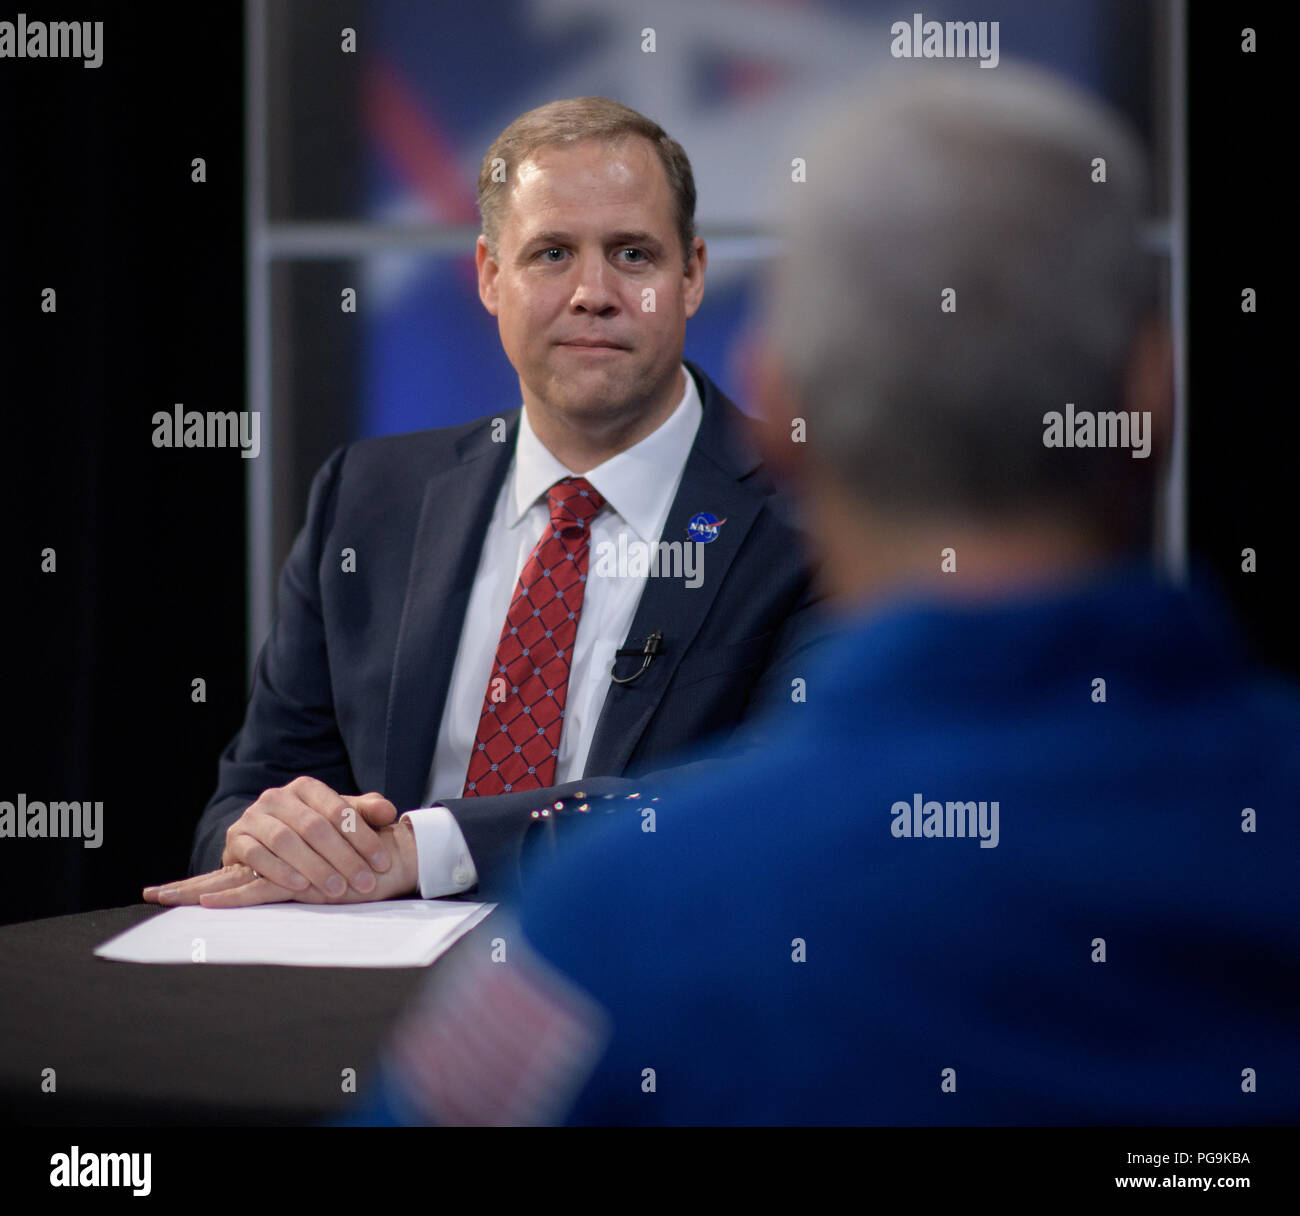 NASA Administrator Jim Bridenstine is seen as he meets with Expedition 54 NASA astronauts Joe Acaba and Mark Vande Hei during their Expedition 54 post flight, Wednesday, June 13, 2018 at NASA Headquarters, Washington. Stock Photo